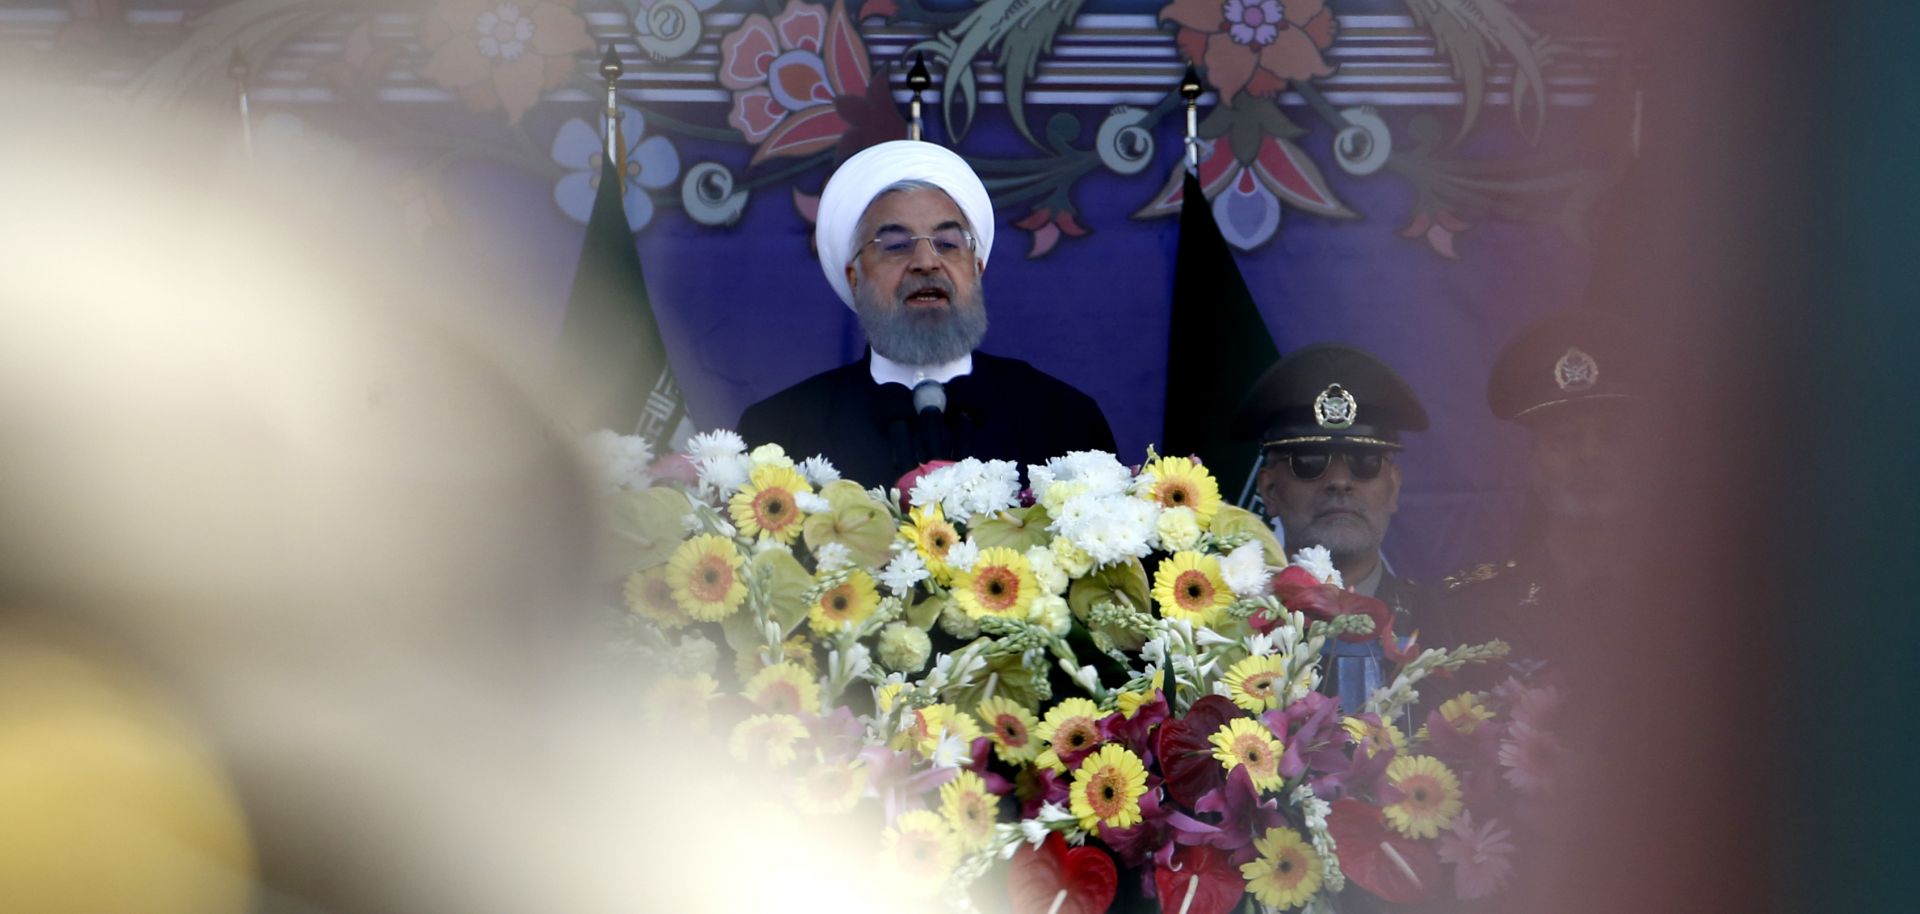 Iranian President Hassan Rouhani gives a speech during a parade on Army Day, which celebrates the country's military.